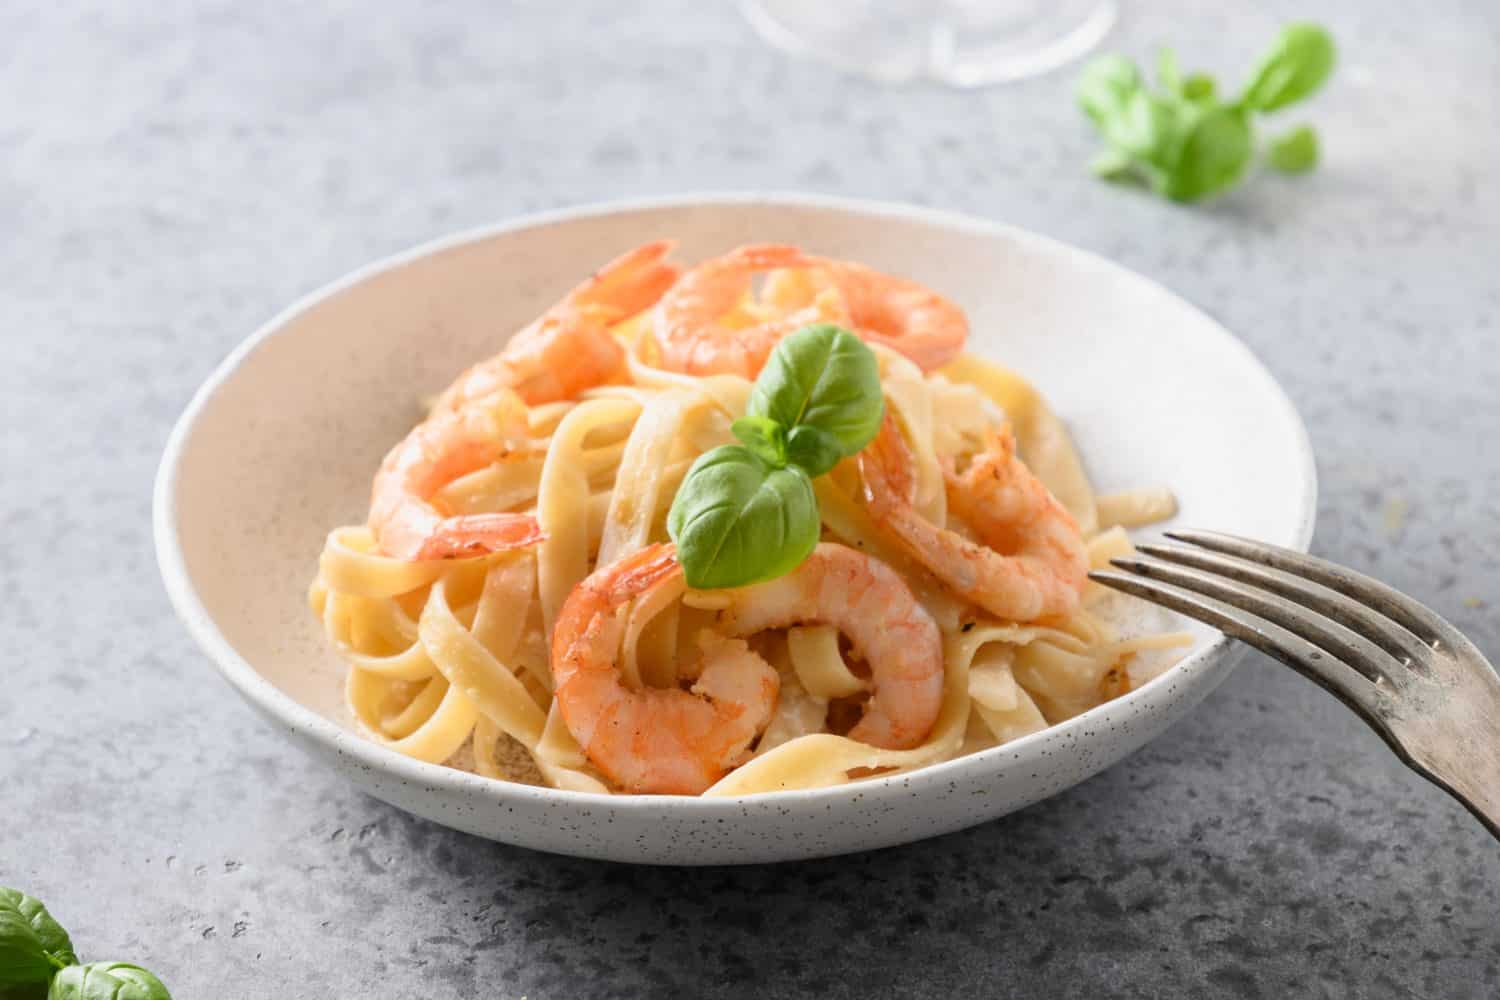 Italian pasta fettuccine with shrimps in white bowl on gray table. Close up.